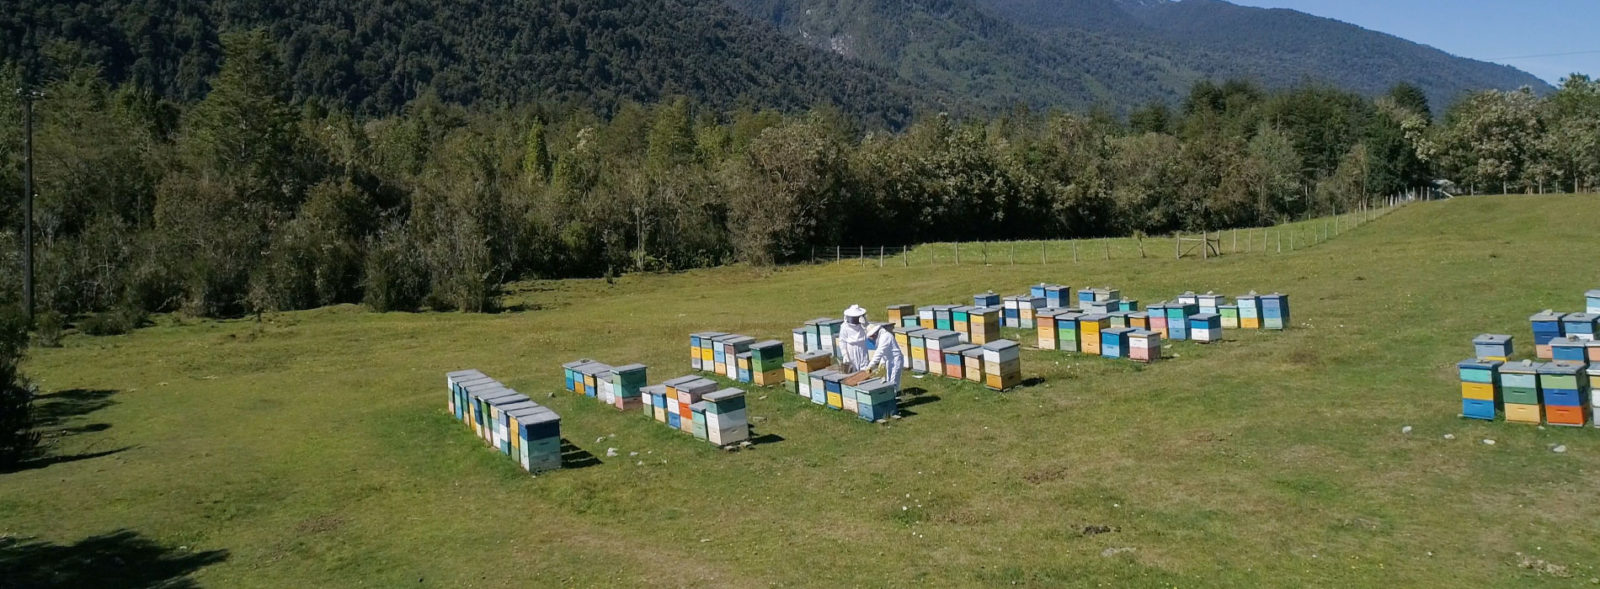 Our bees in good health